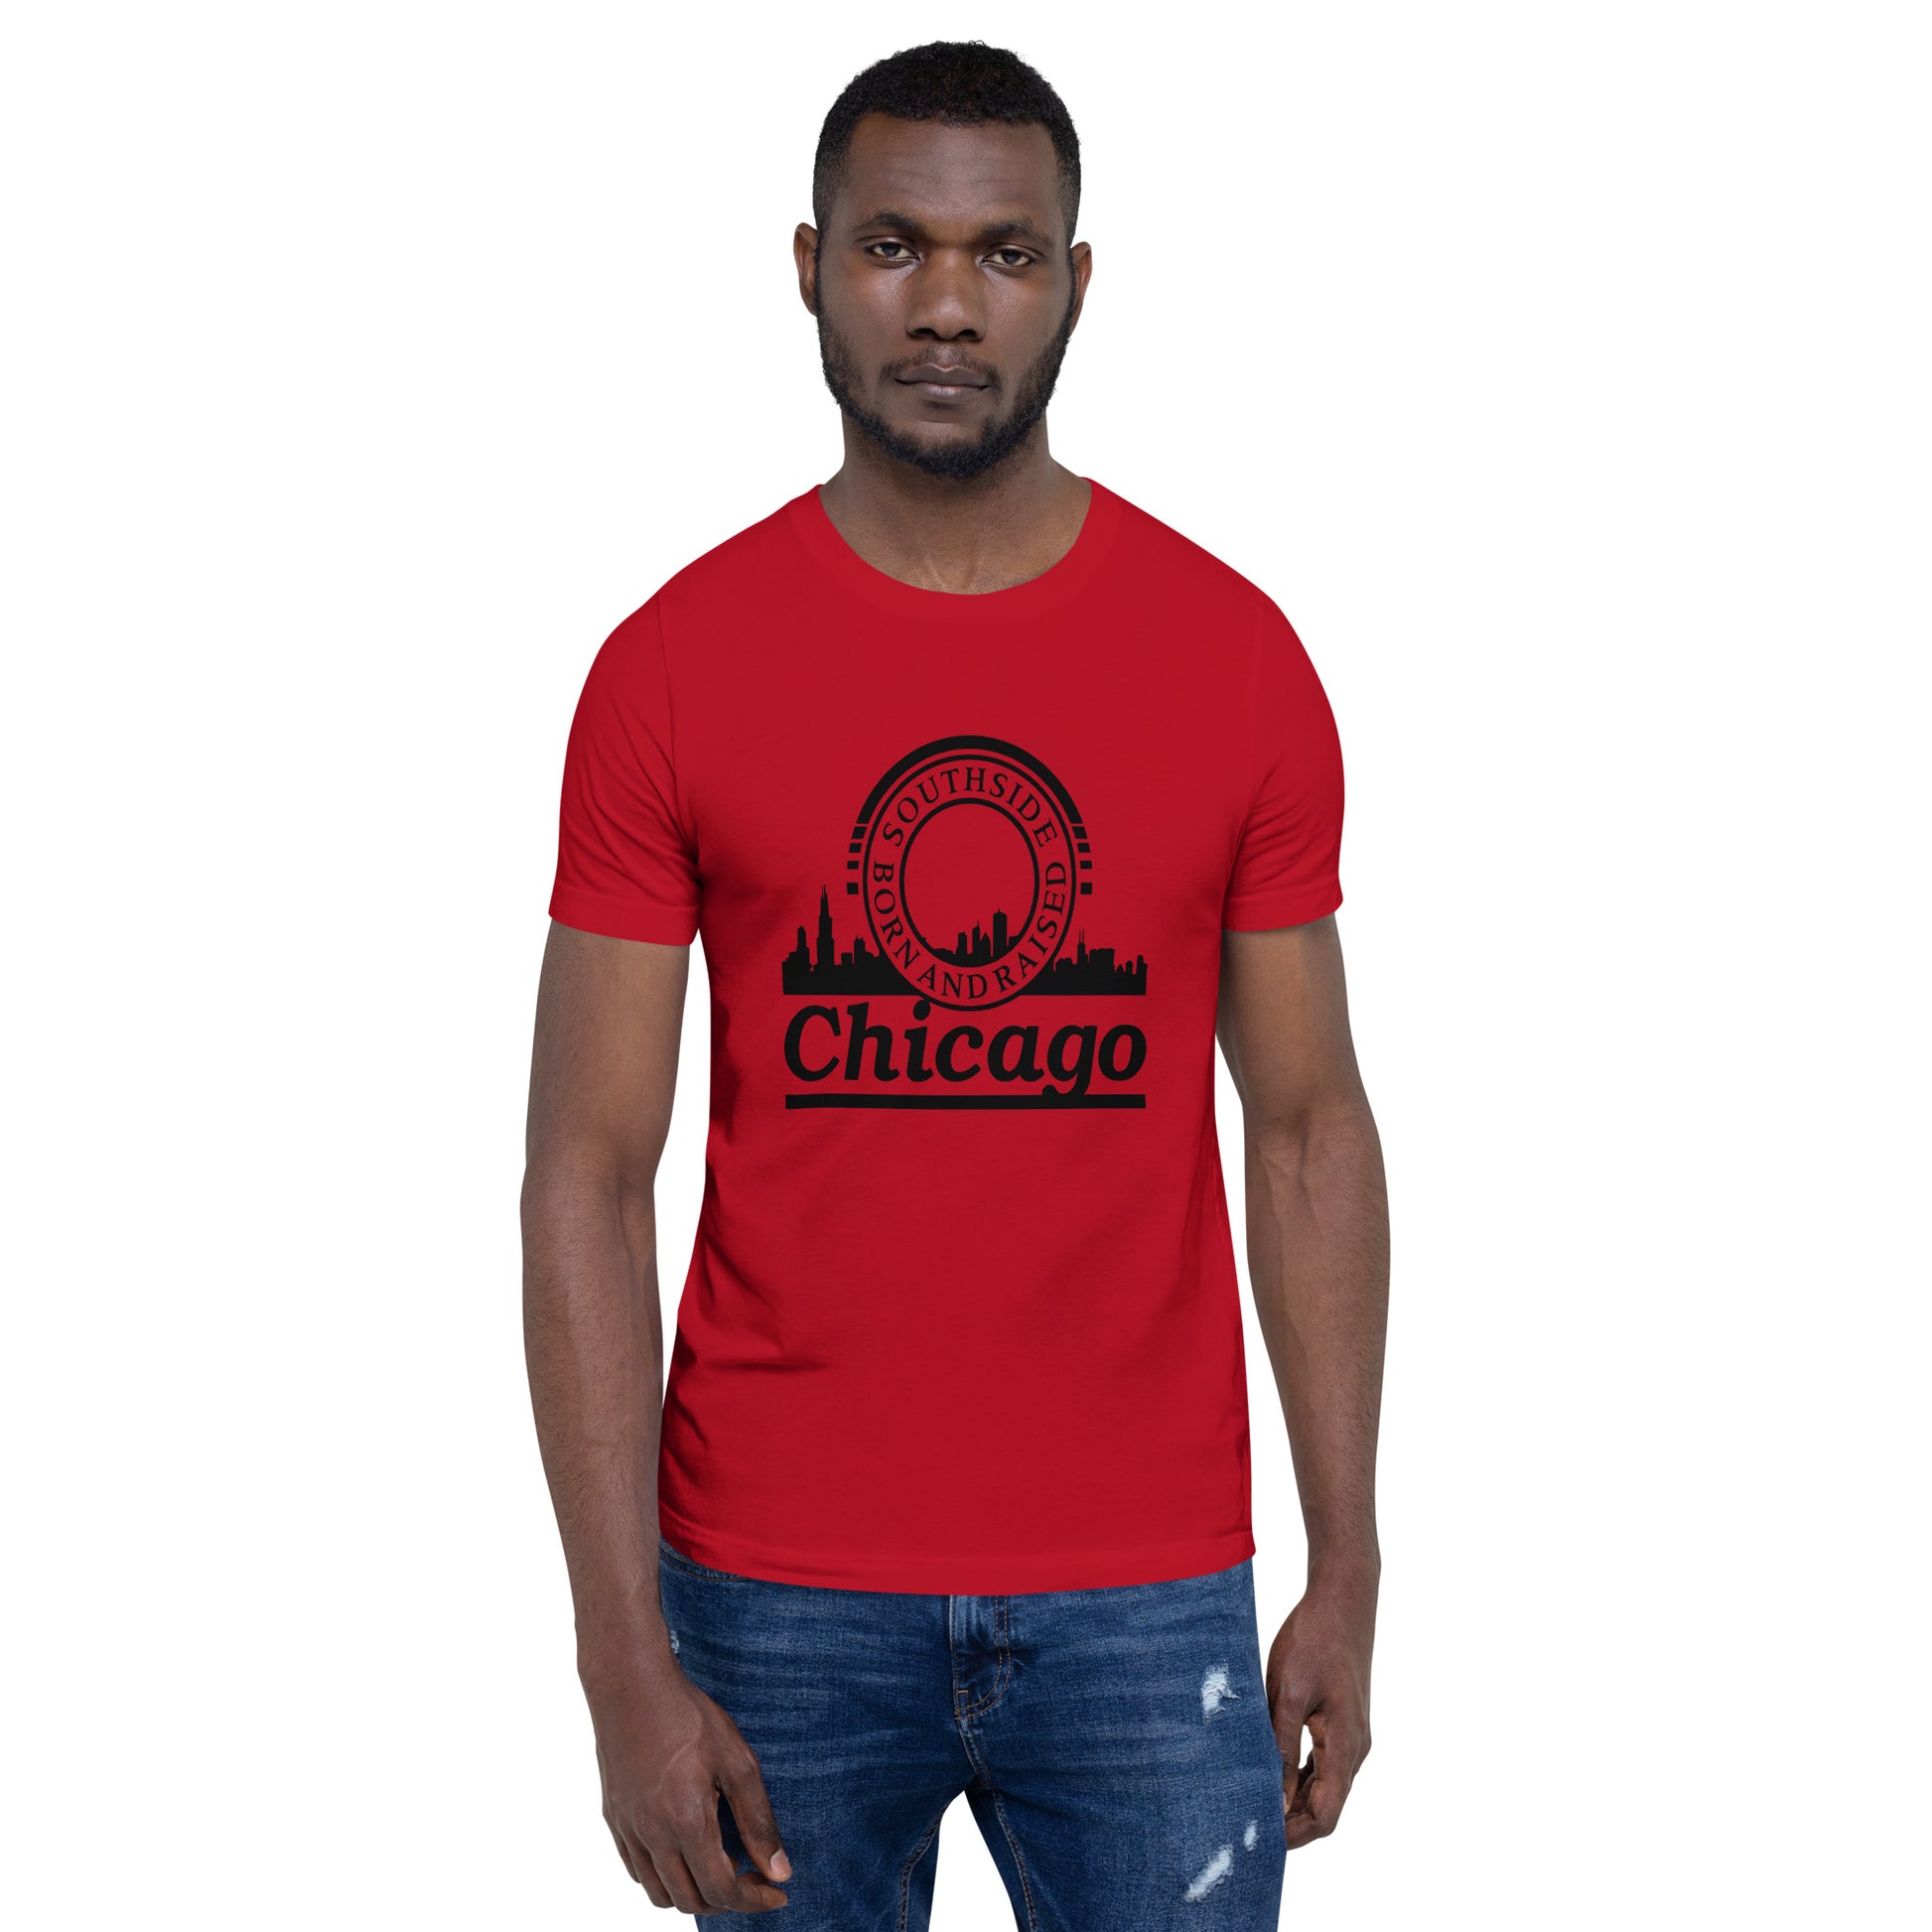 Chicago Drip red shirt, The Outsider's shirt